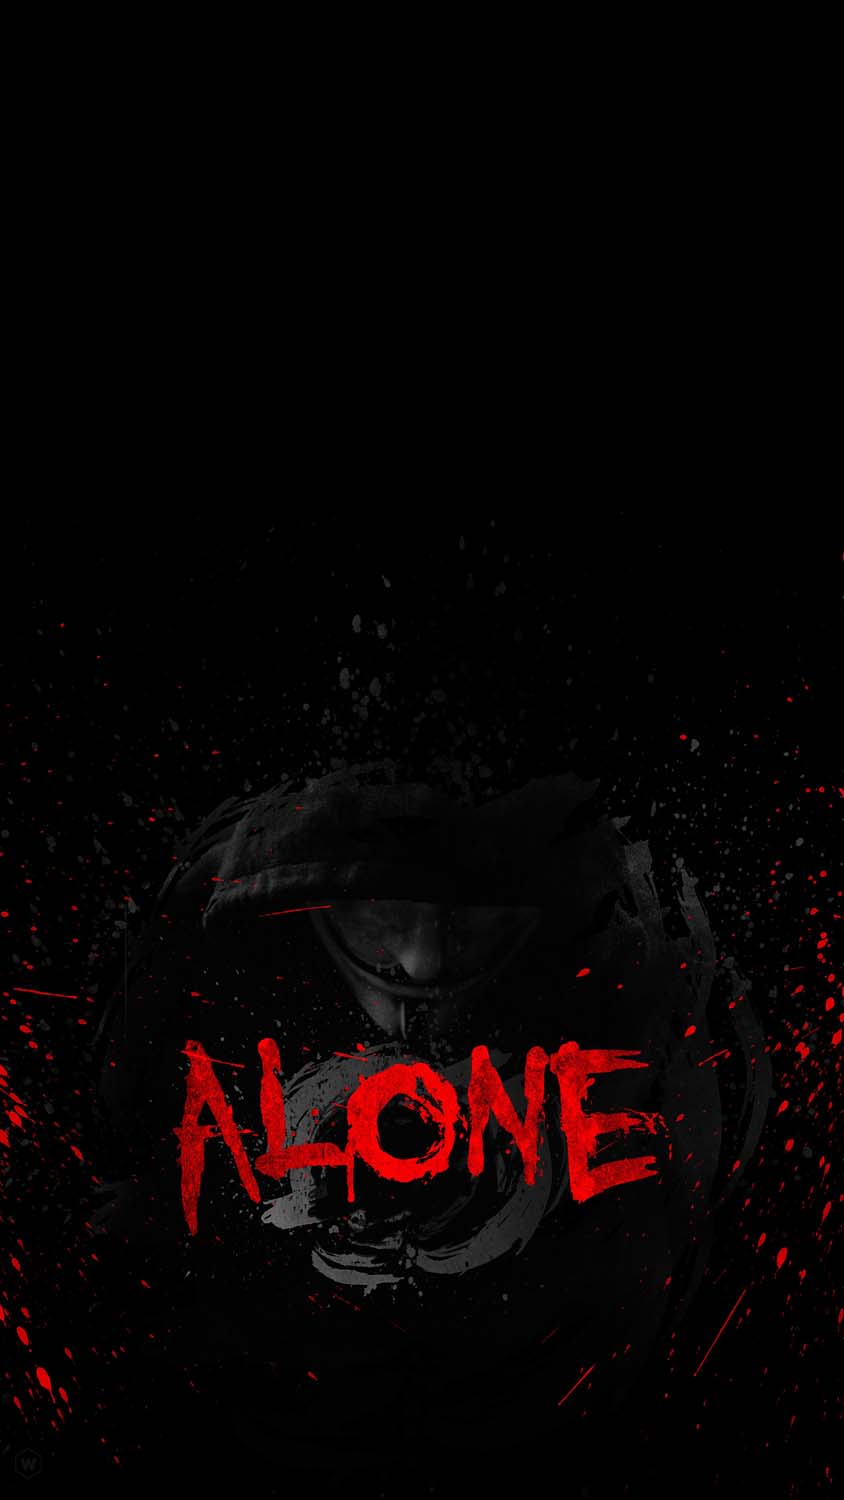 Alone In The Dark Wallpapers